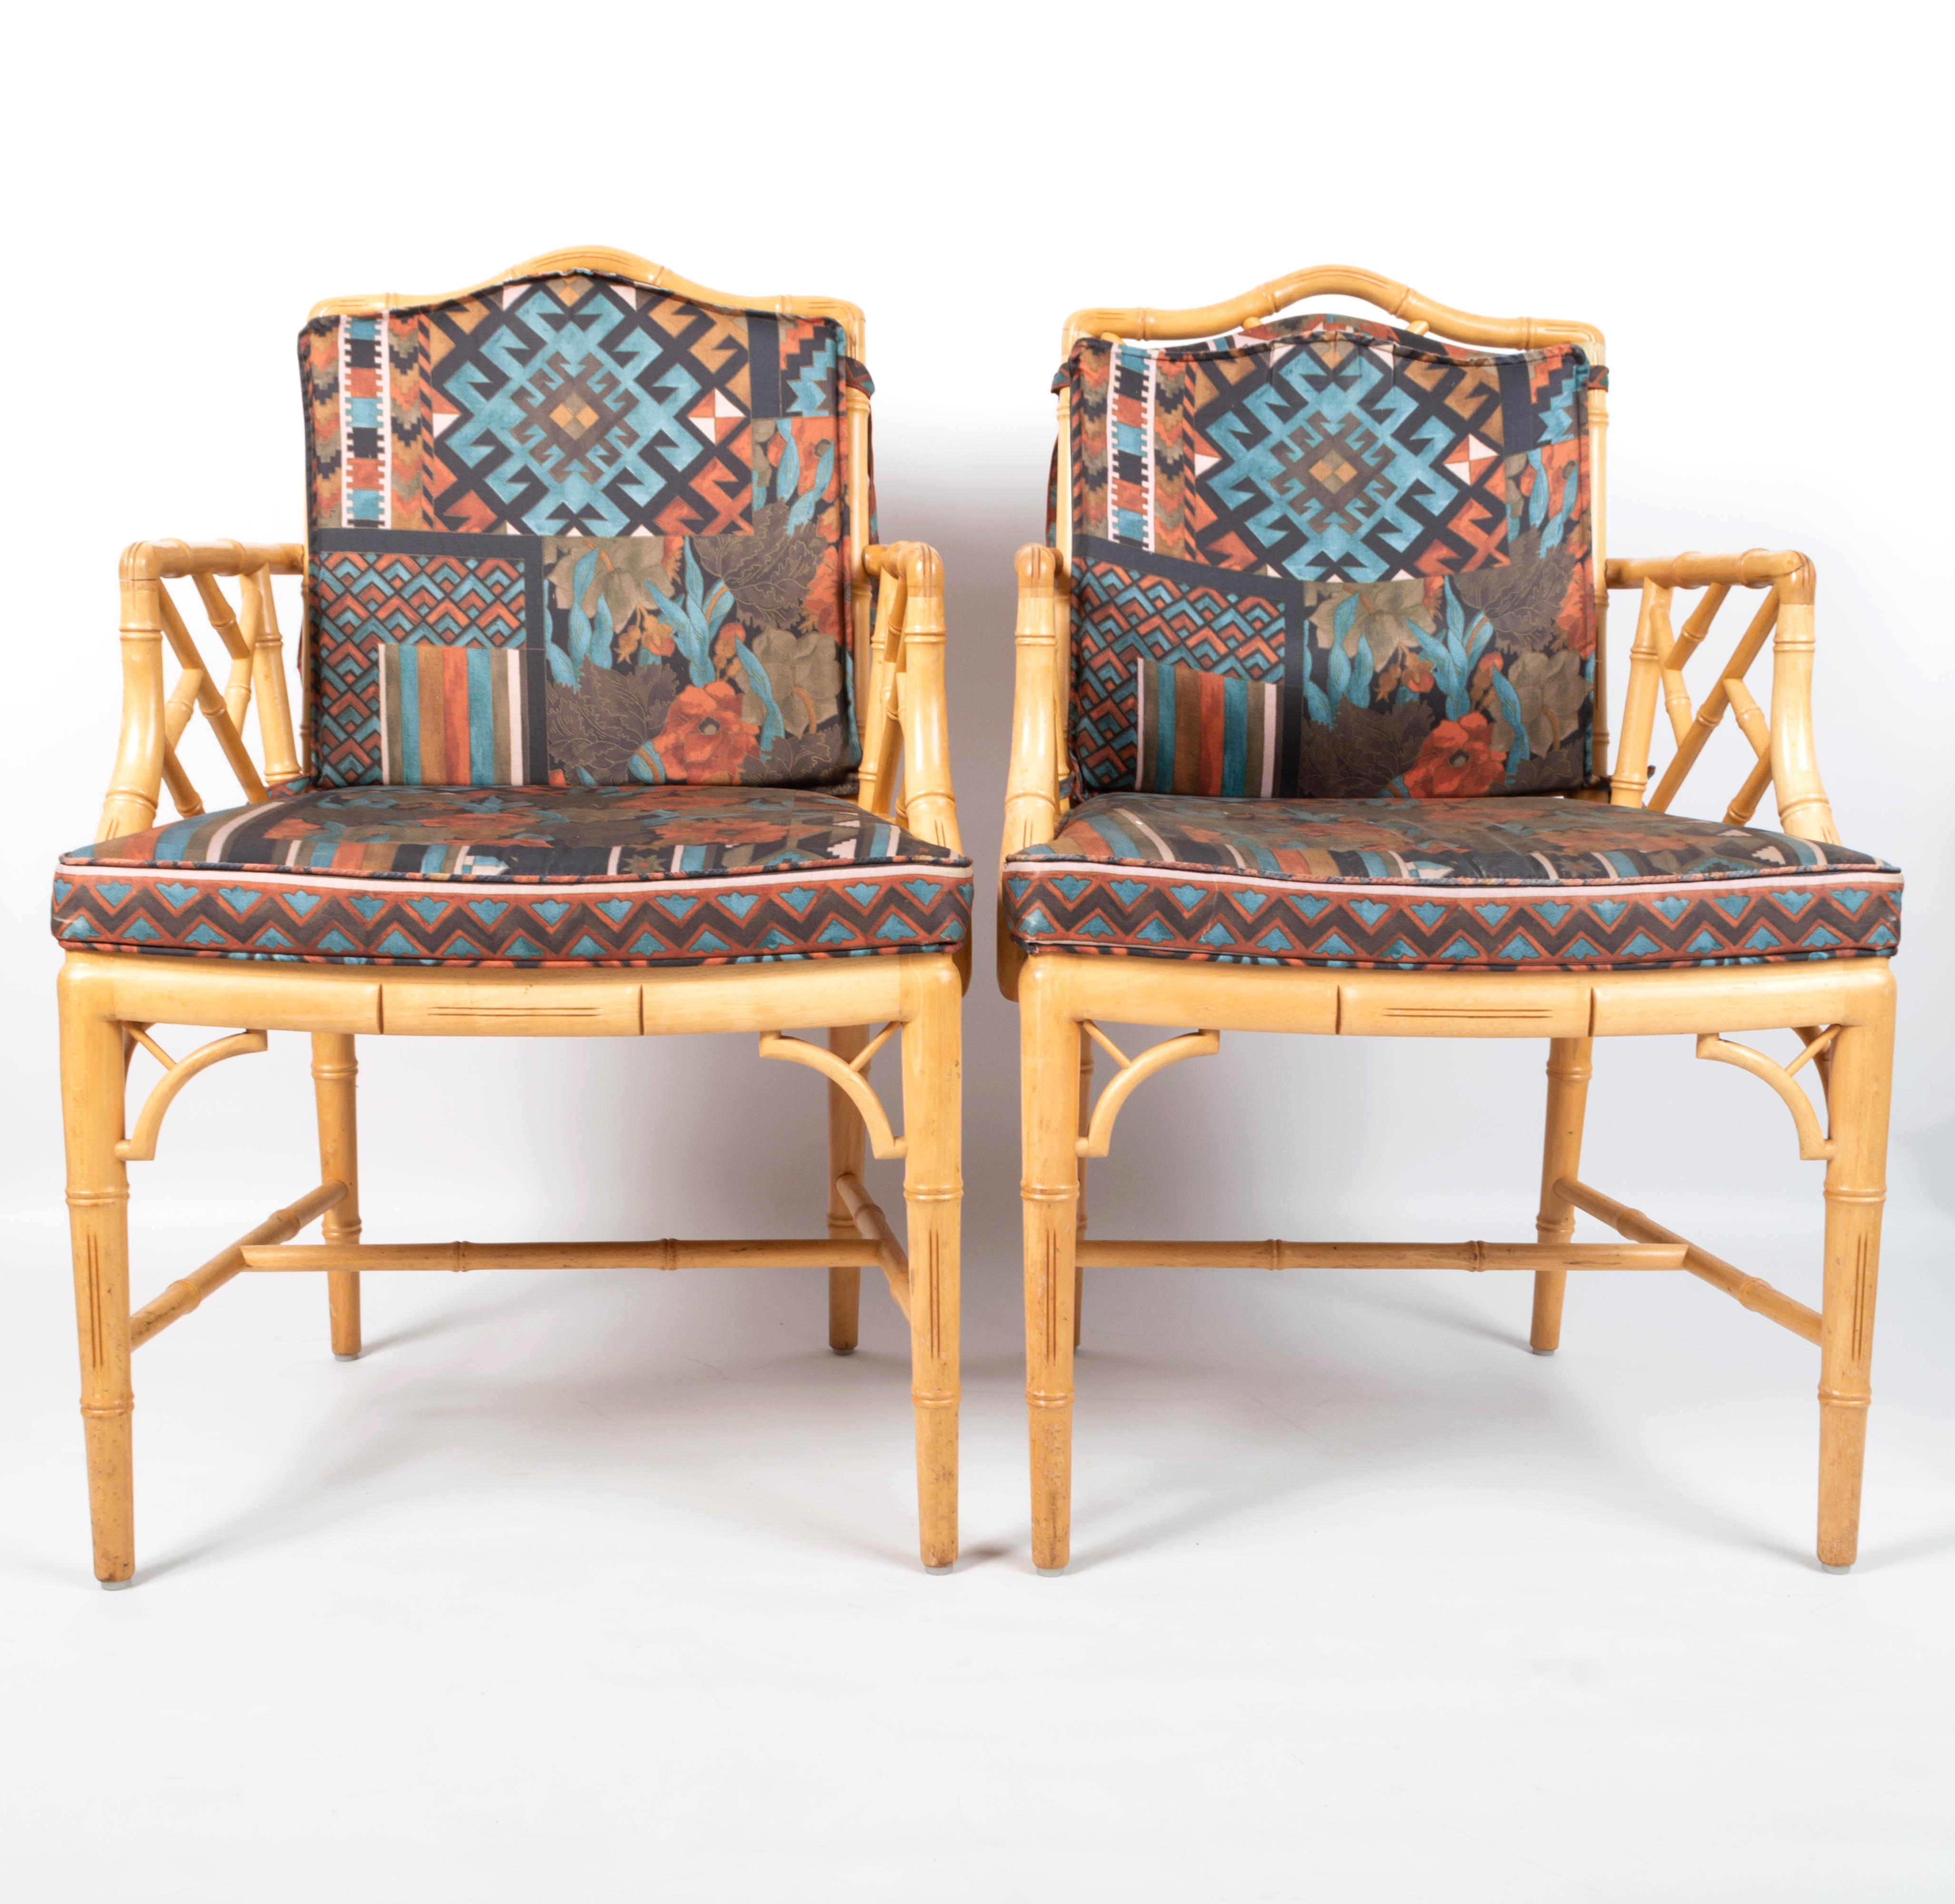 A pair of mid century Chippendale style Faux Bamboo armchairs, 
England, C.1970

In very good condition commensurate with age. Chairs are solid and sturdy.